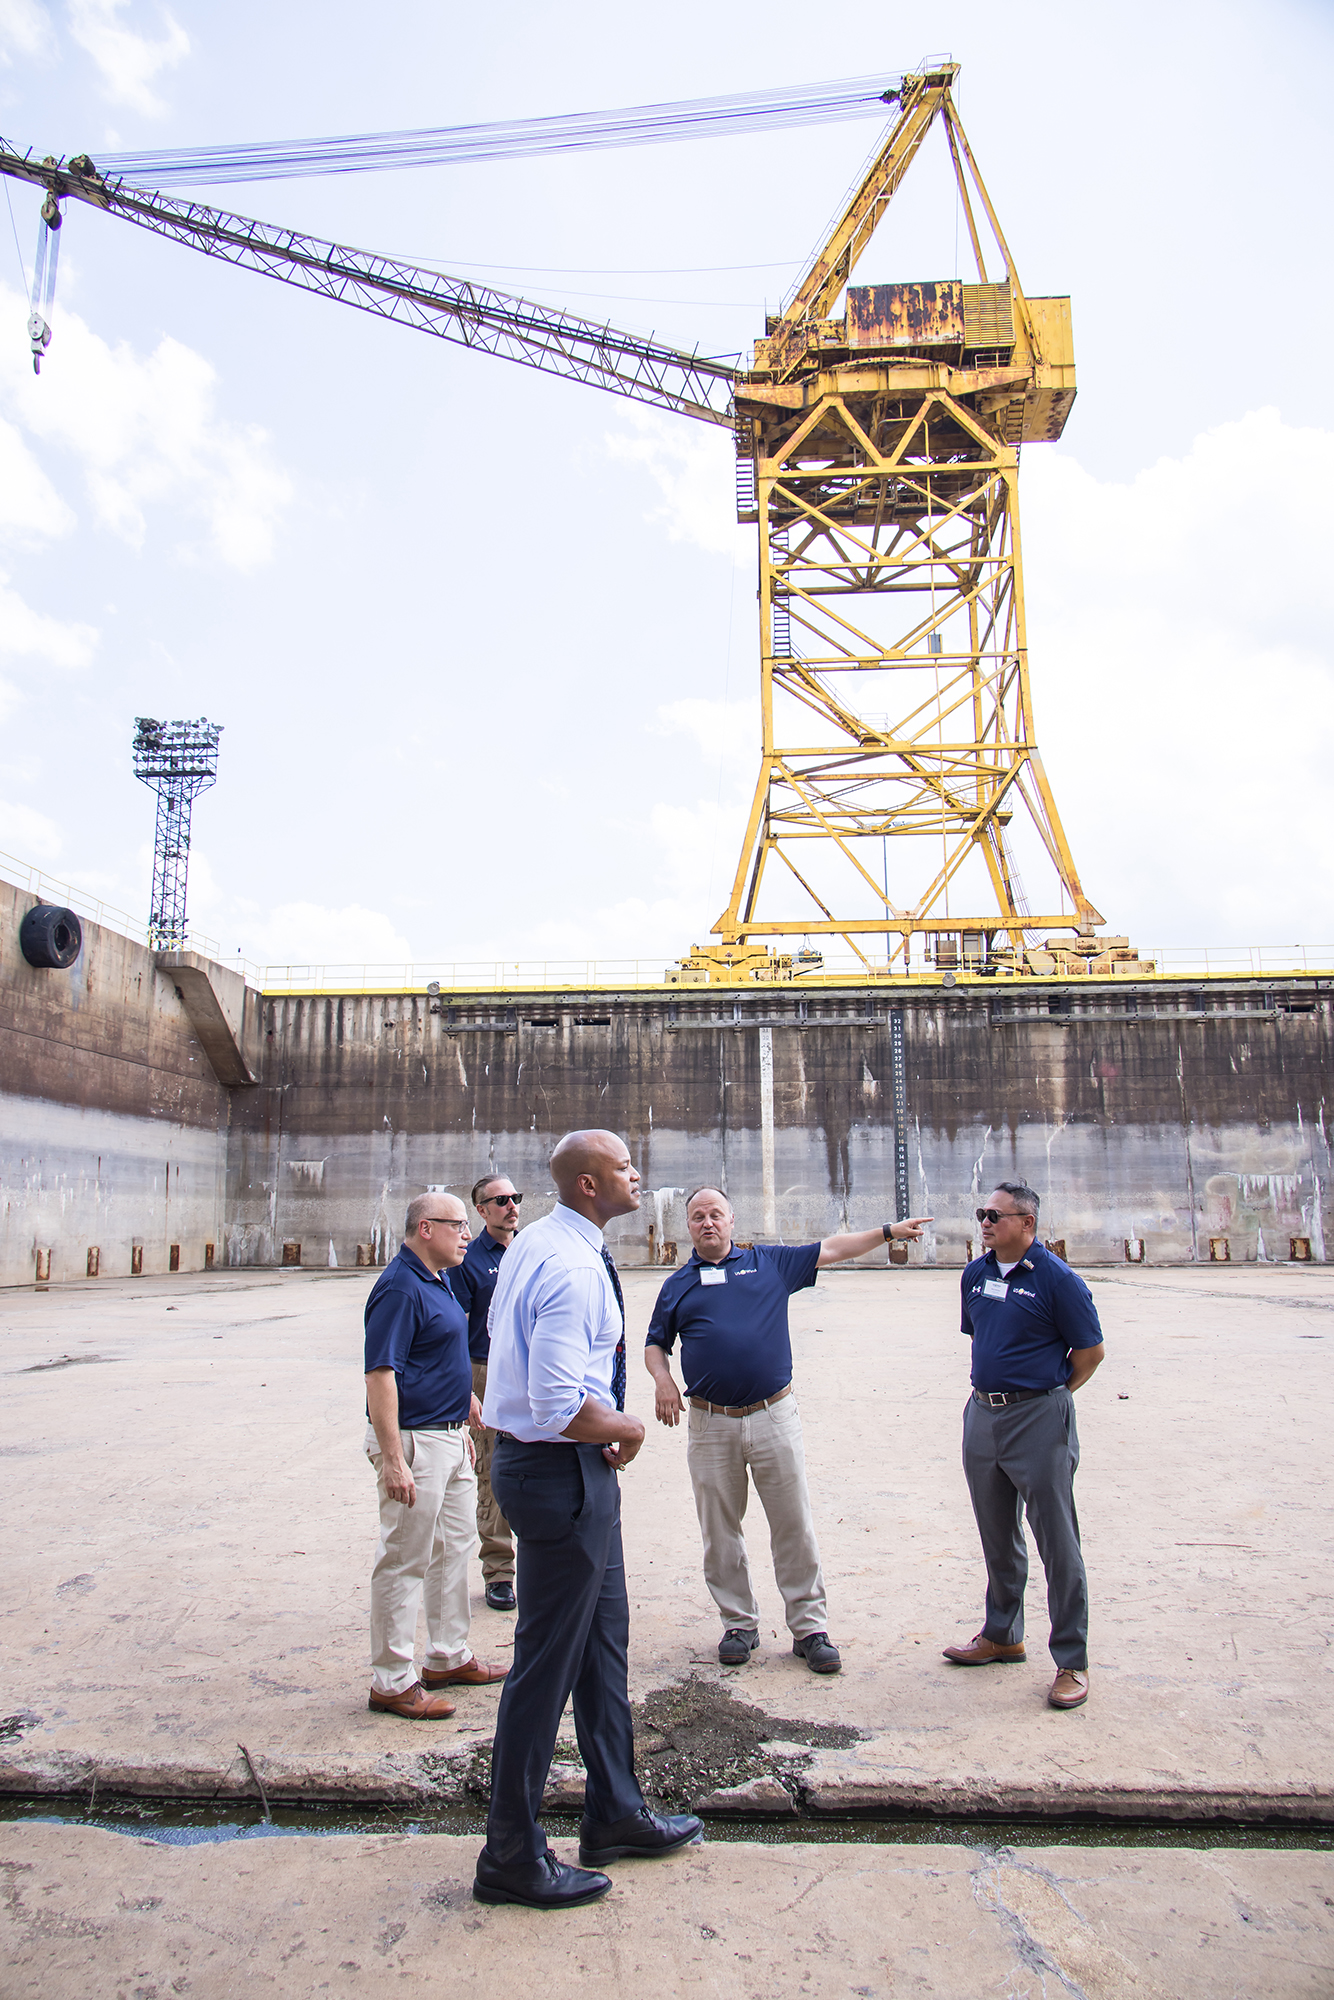 Jeff Grybowski, CEO of US Wind Inc., and Team together with Governor [Wes] Moore, touring the Sparrows Point site (Foto: US Wind)